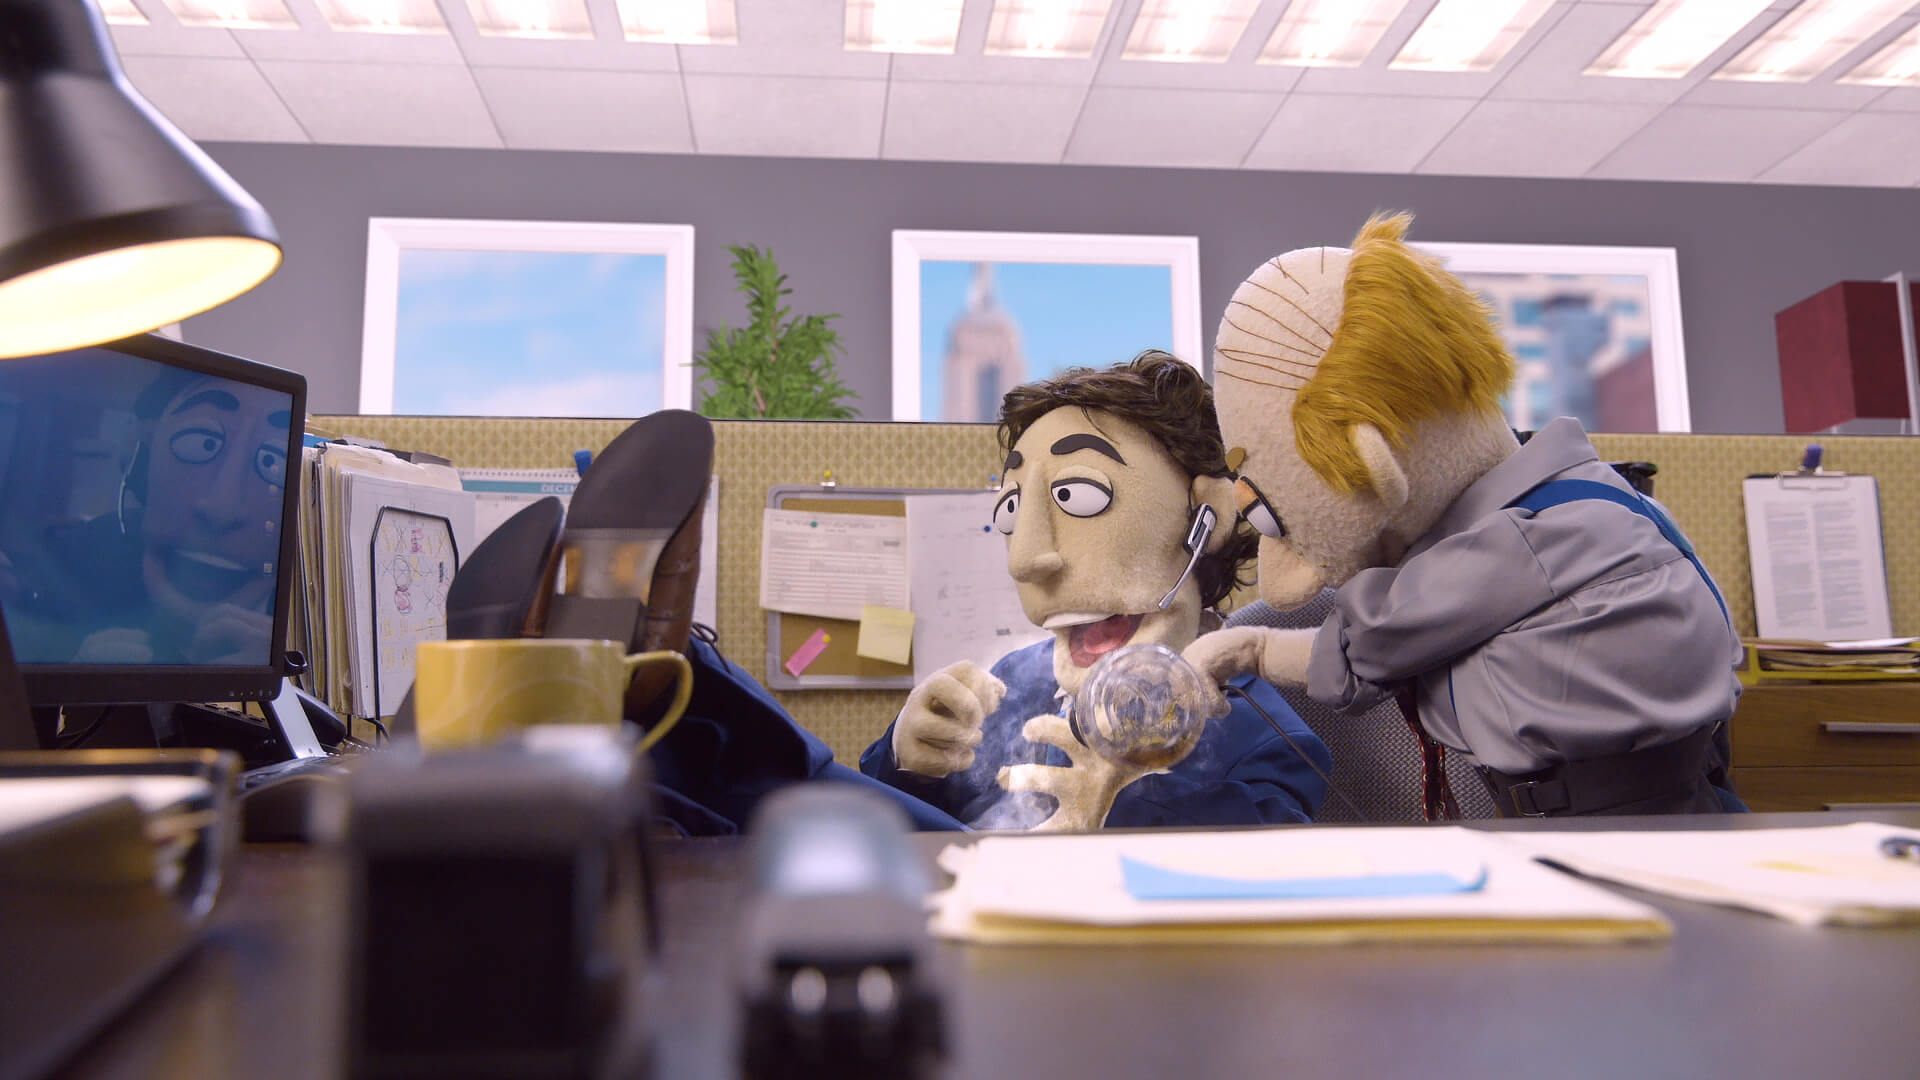 Kevin Nealon's puppet gets hot coffee poured on him in a sketch directed by Todd Bishop for Comedy Central's Crank Yankers